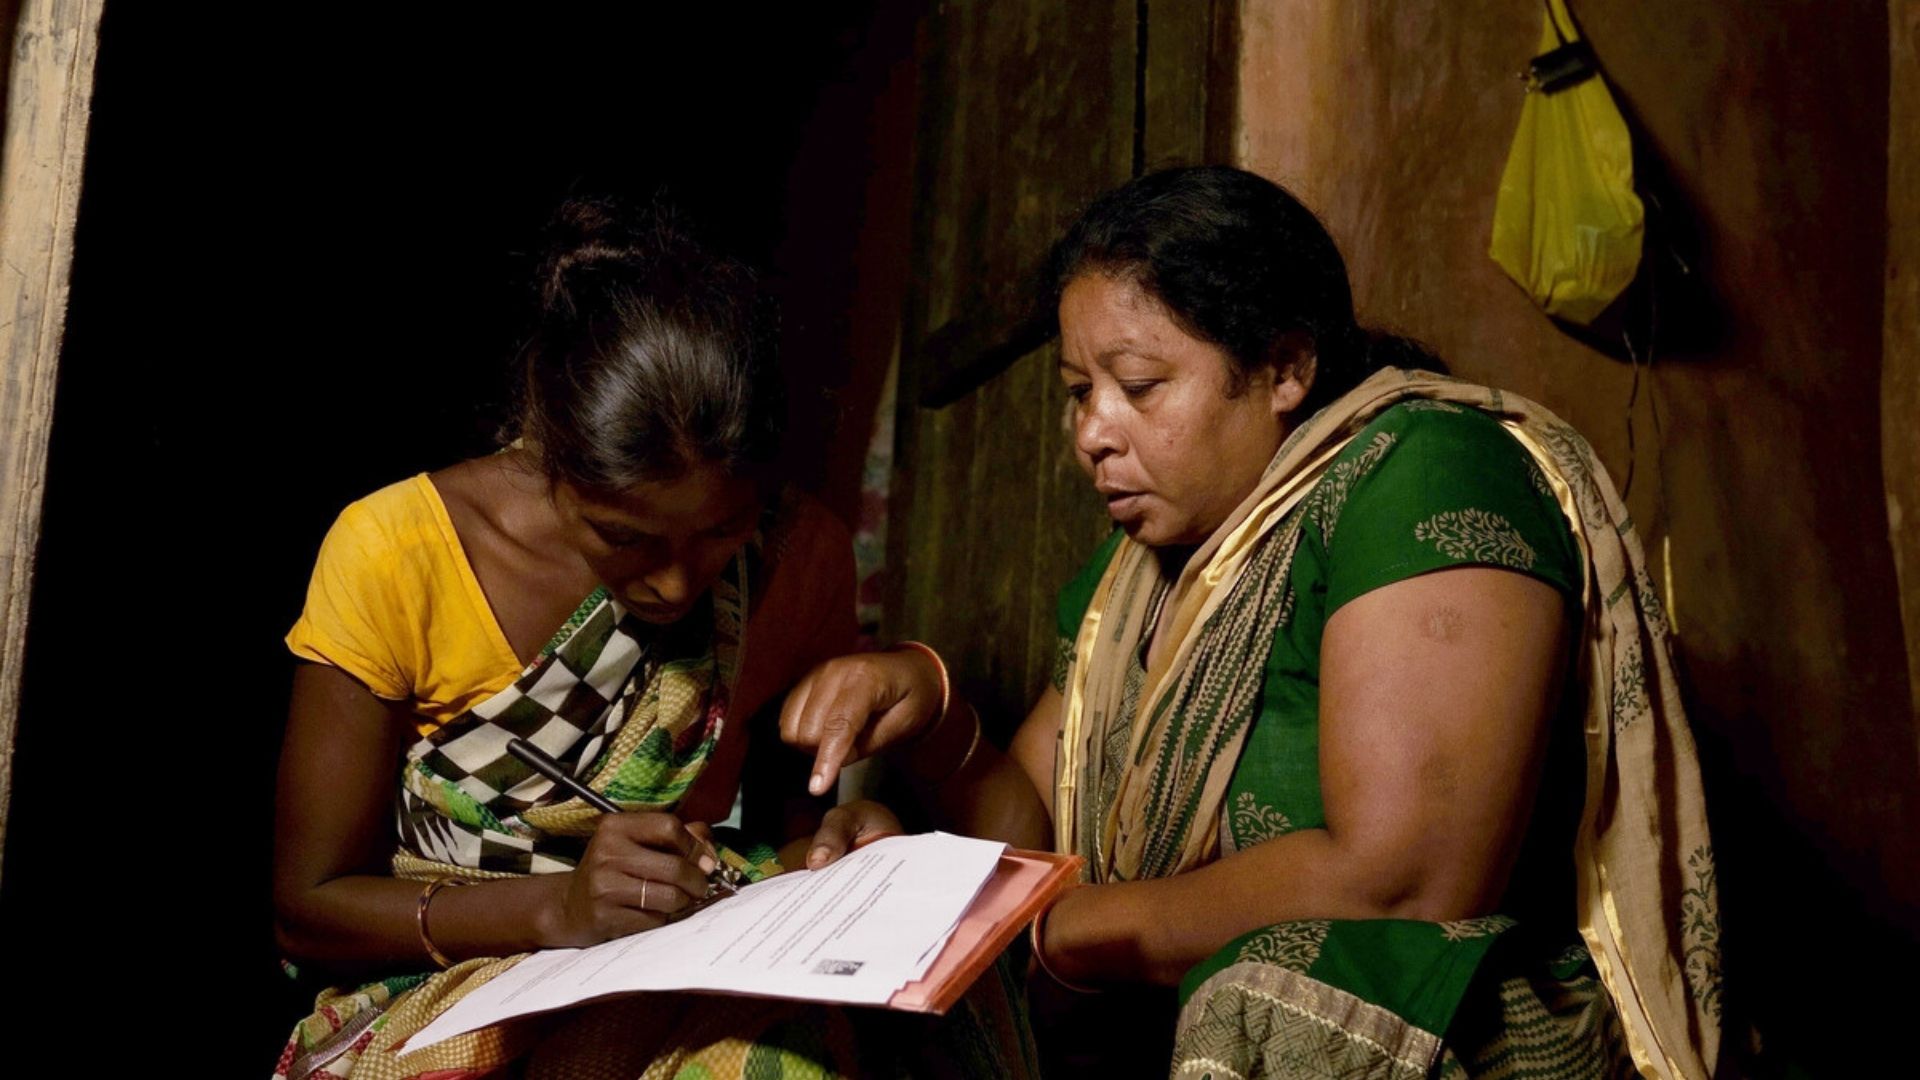 Preethi, a community volunteer from our local partner, Children In Need Institute (CINI), helps Radha* (Sonia's* mum) to fill in the application form for government support schemes she is eligible for.